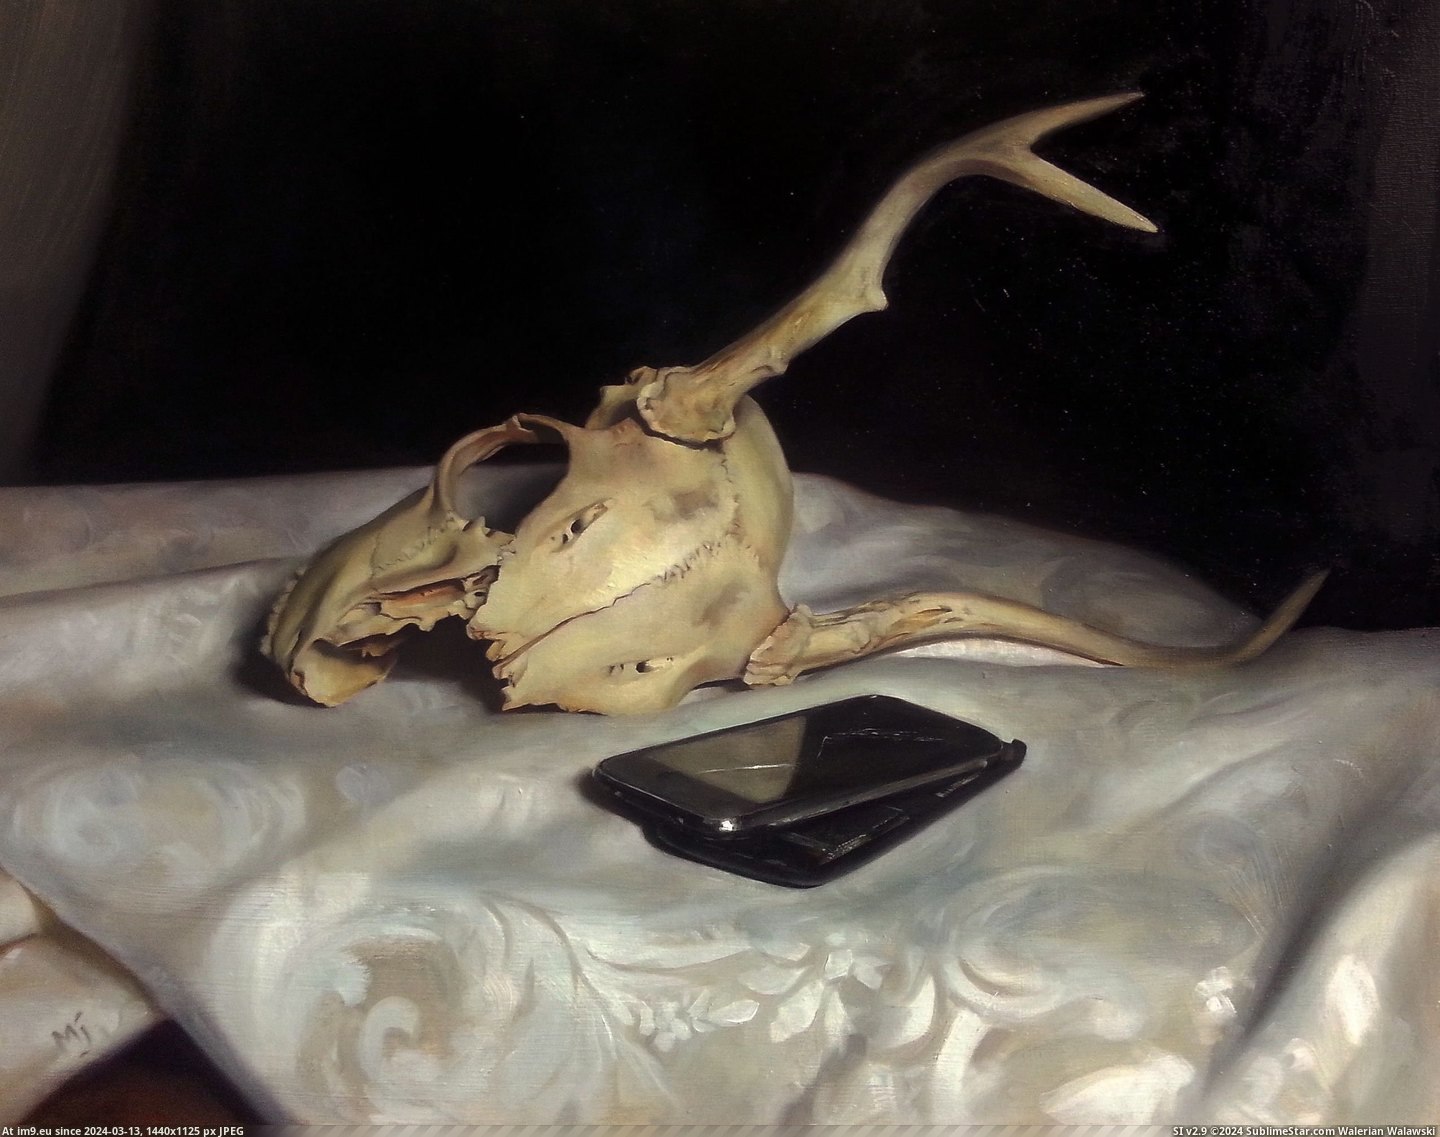 #For #Time #Old #Painting #Project #Finished #Broken #Skull #Life #Shit #Phone #Load [Pics] I just finished painting an old broken phone and skull for a still life project from life, it took a shit load of time an Pic. (Изображение из альбом My r/PICS favs))